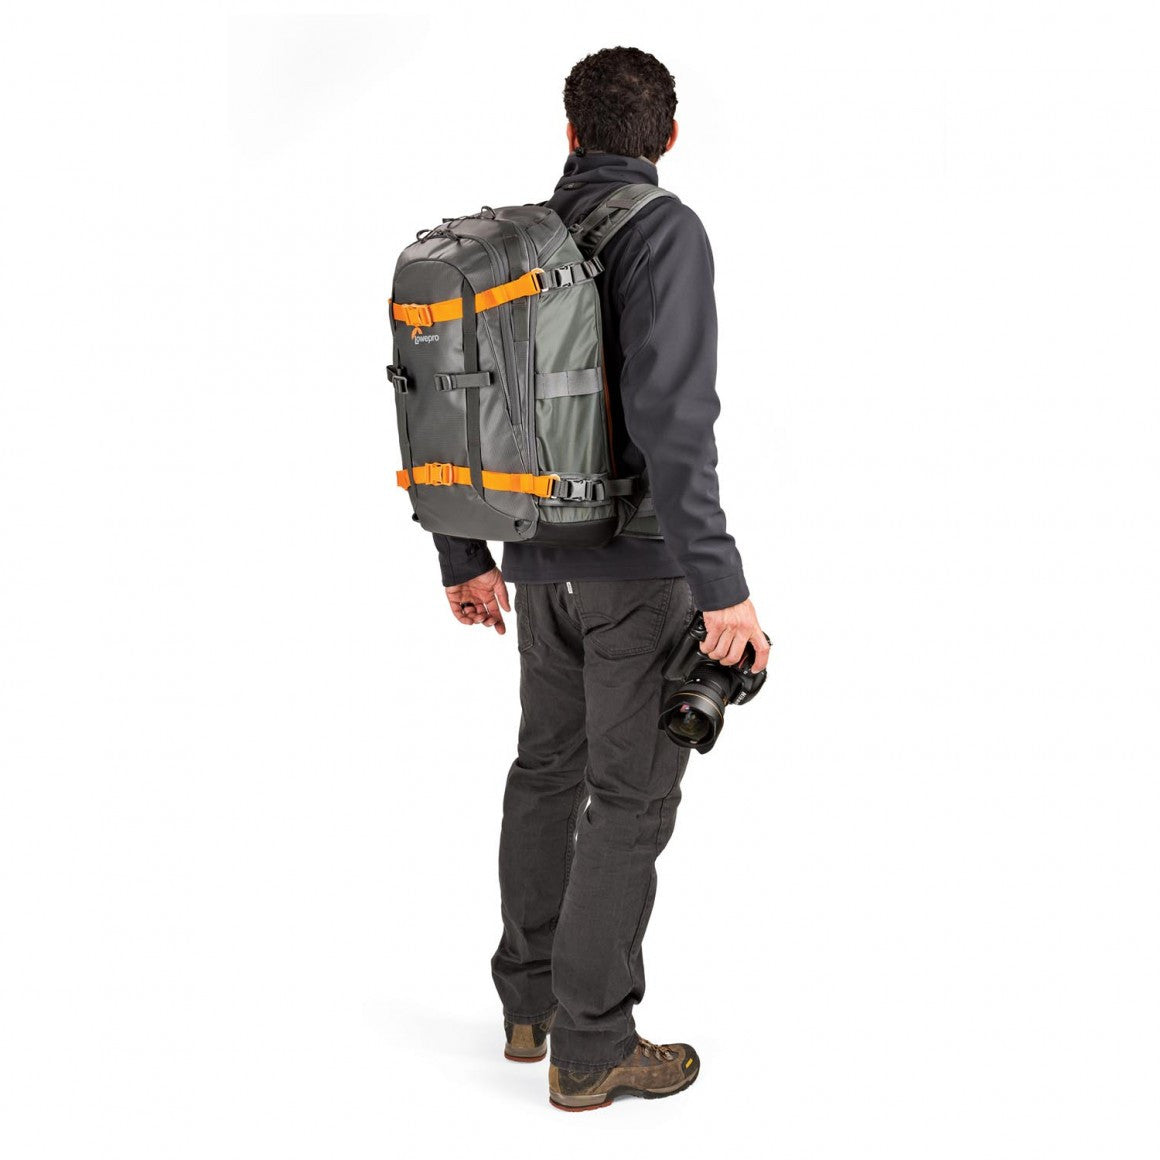 Lowepro Whistler 350AW Backpack (Grey), bags backpacks, Lowepro - Pictureline  - 7